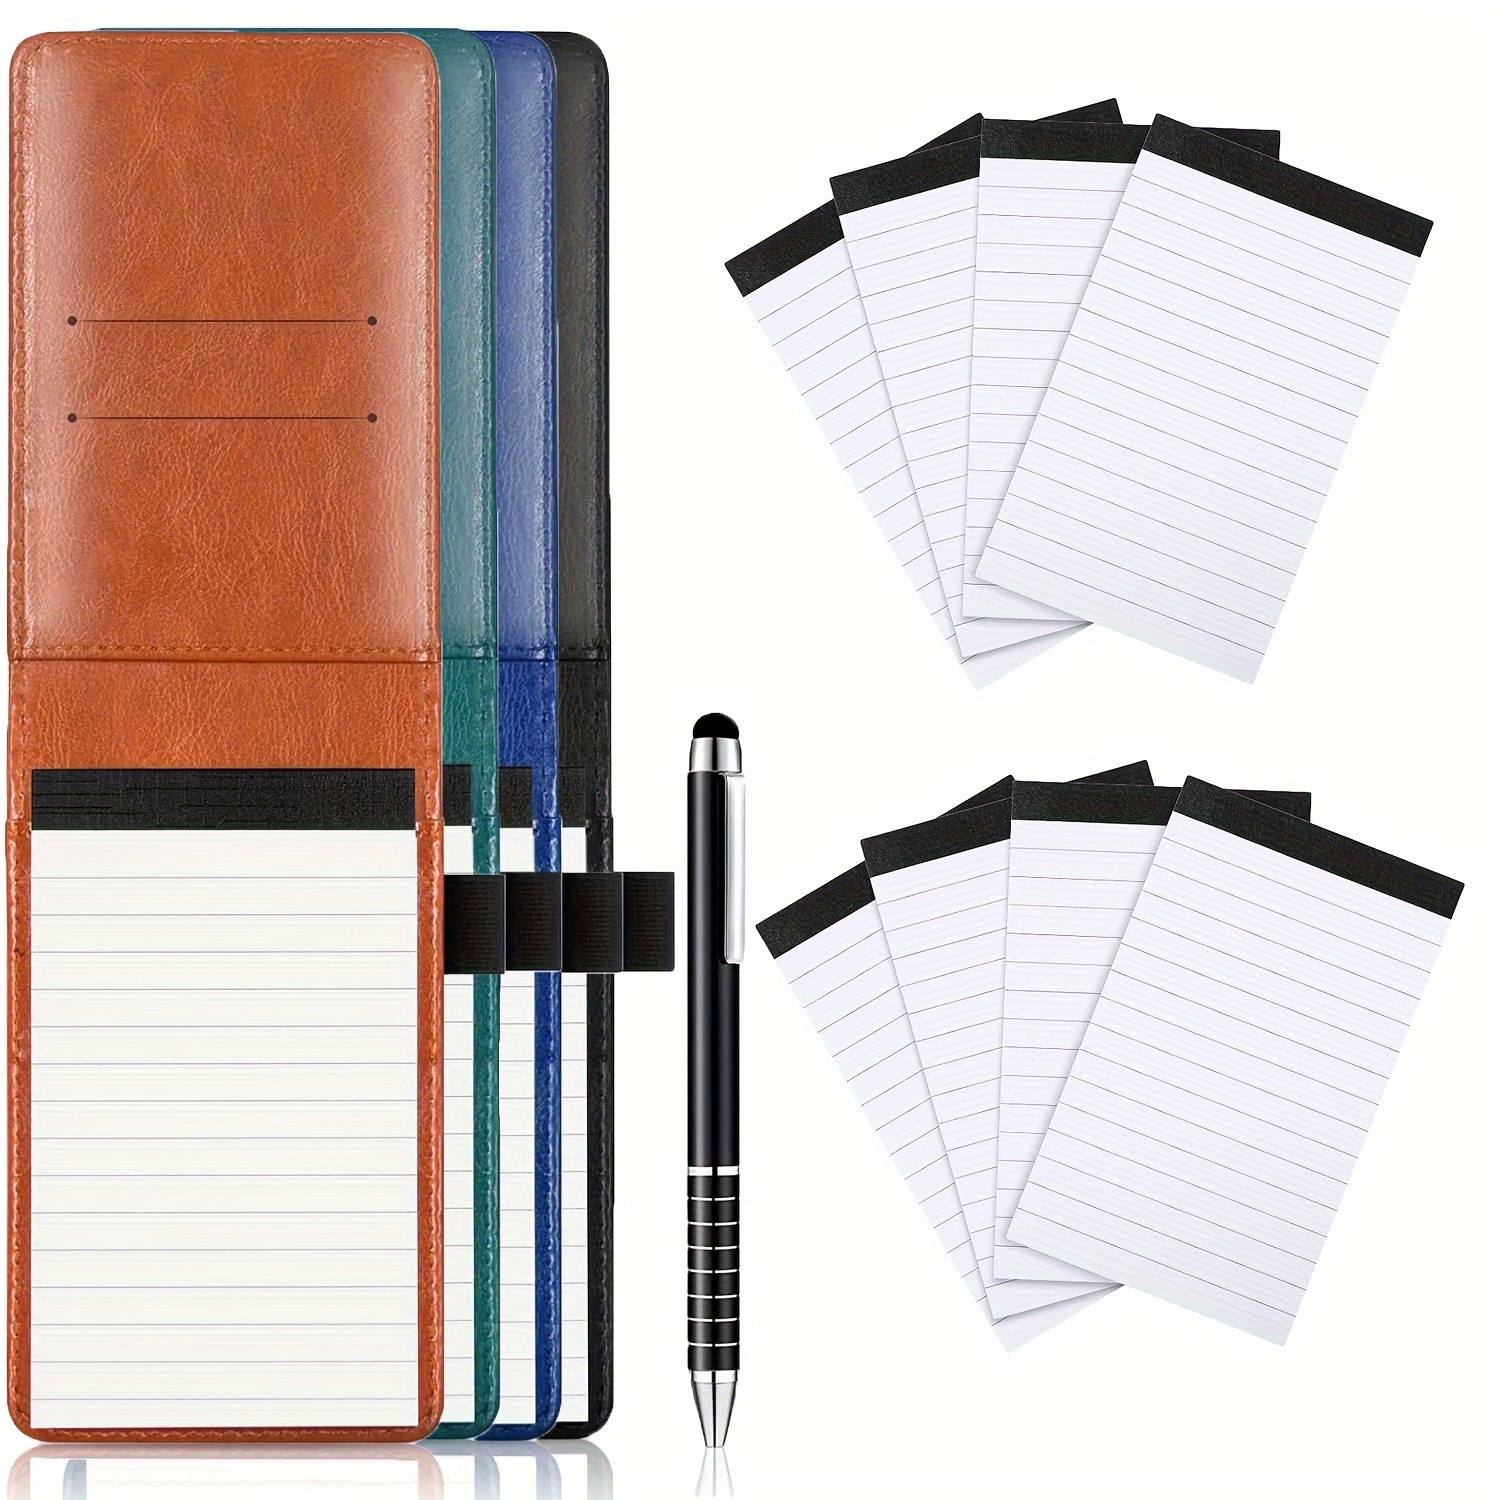 

10pcs Small Notepad Holder Set, Including A Leather Pocket Notebpad Hold With 50 Lined Sheets, A Metal Pen And 8pcs 3 X 5 Inch Replaceable Memo Pad(30 Sheets Each), Perfect For School, Office,home